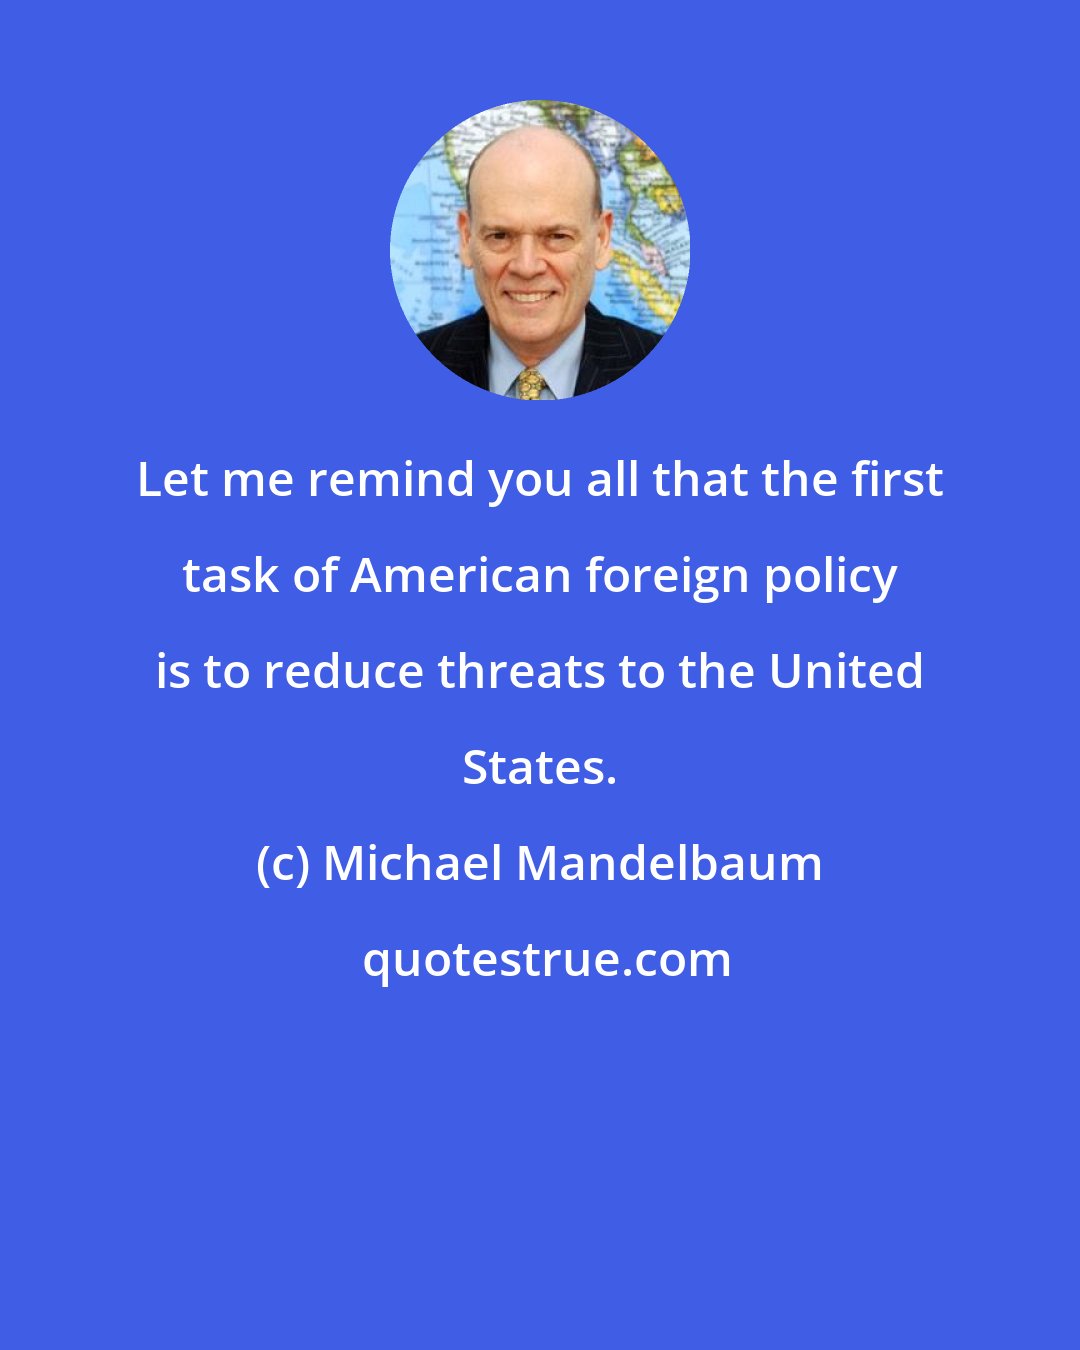 Michael Mandelbaum: Let me remind you all that the first task of American foreign policy is to reduce threats to the United States.